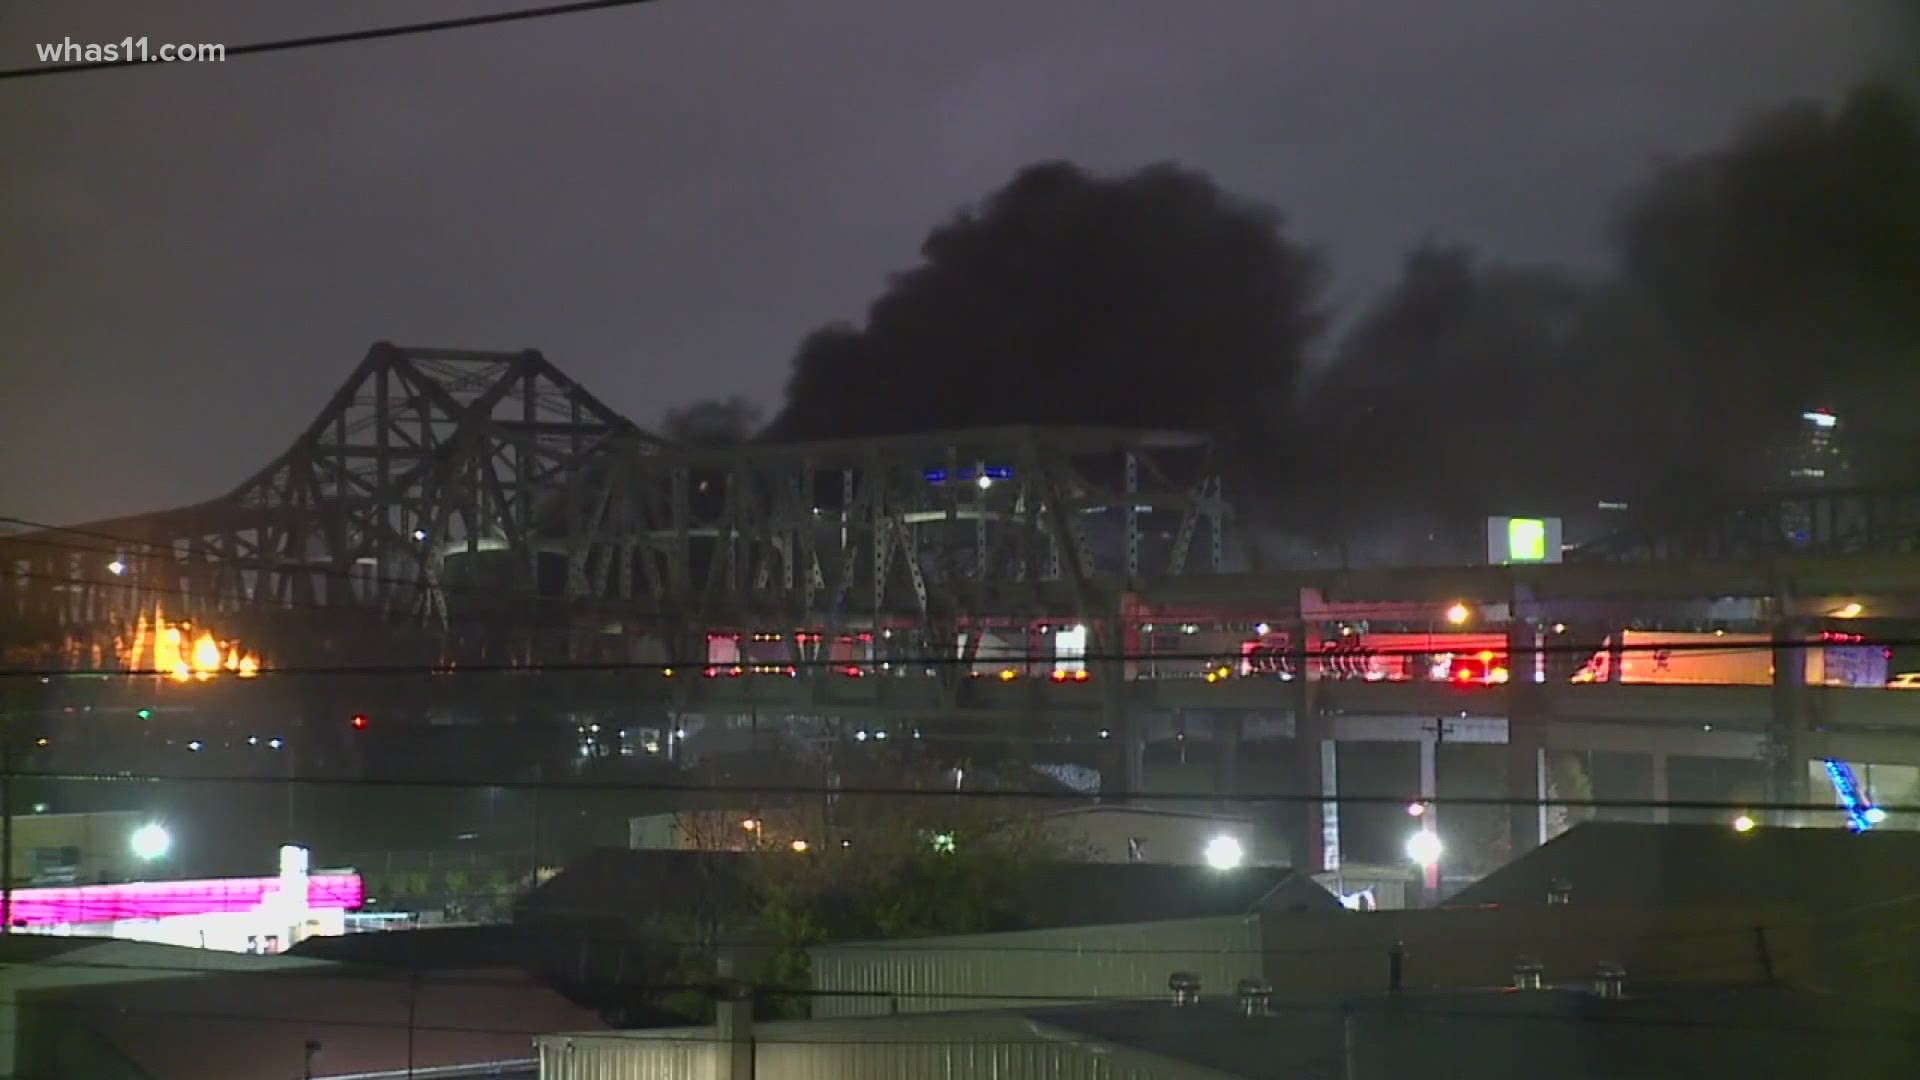 Both lanes of I-75 on the Brent Spence Bridge were closed early Wednesday morning after two semis struck one another. A fire has caused 'significant' damage.